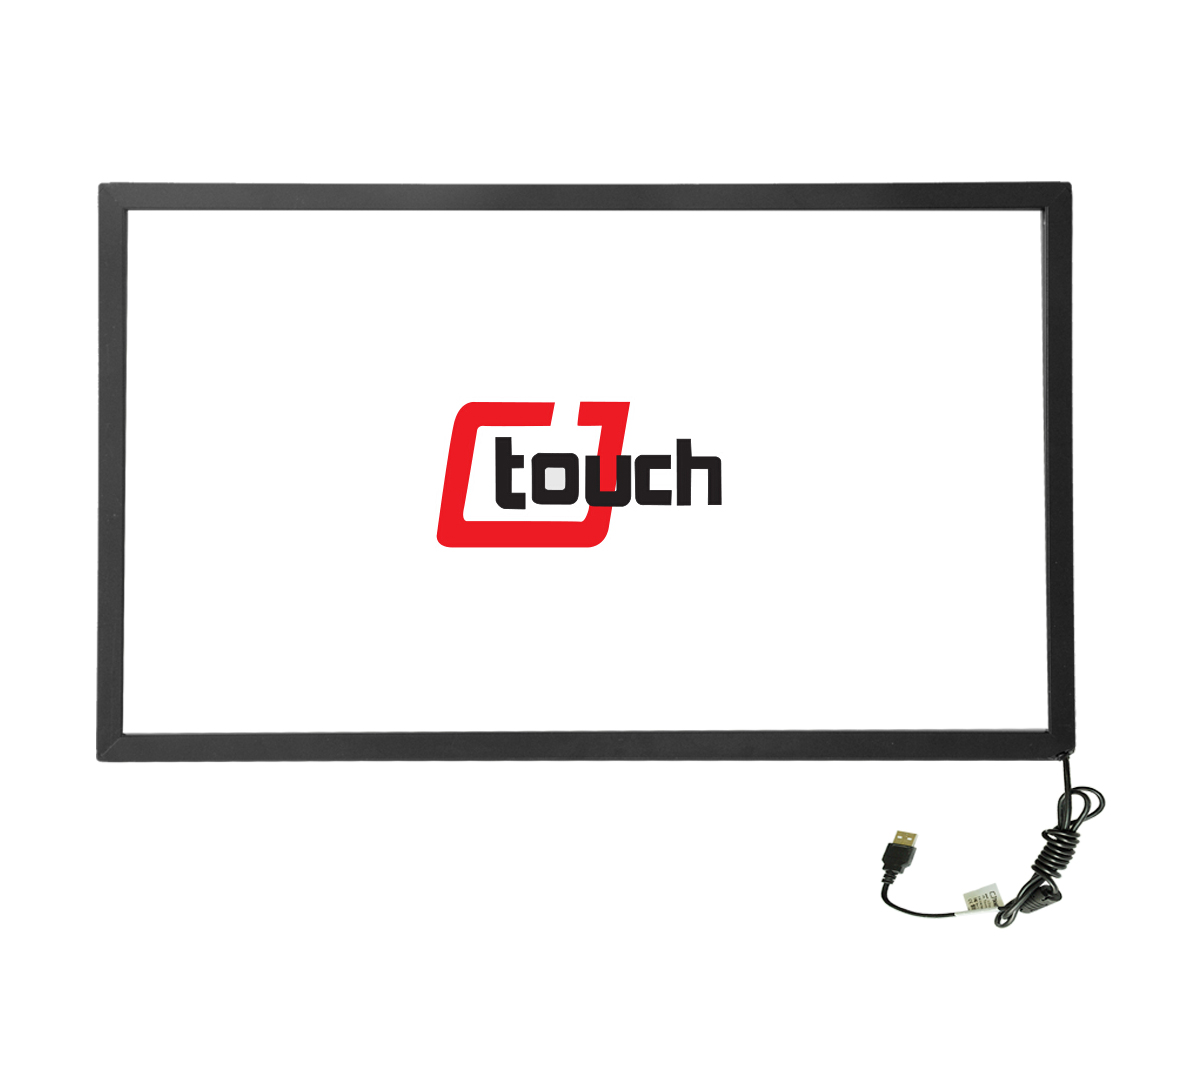 https://www.cjtouch.com/high-qualitty-multi-points-ir-21-5-inch-infrared-touch-screen-frame-kit-product/